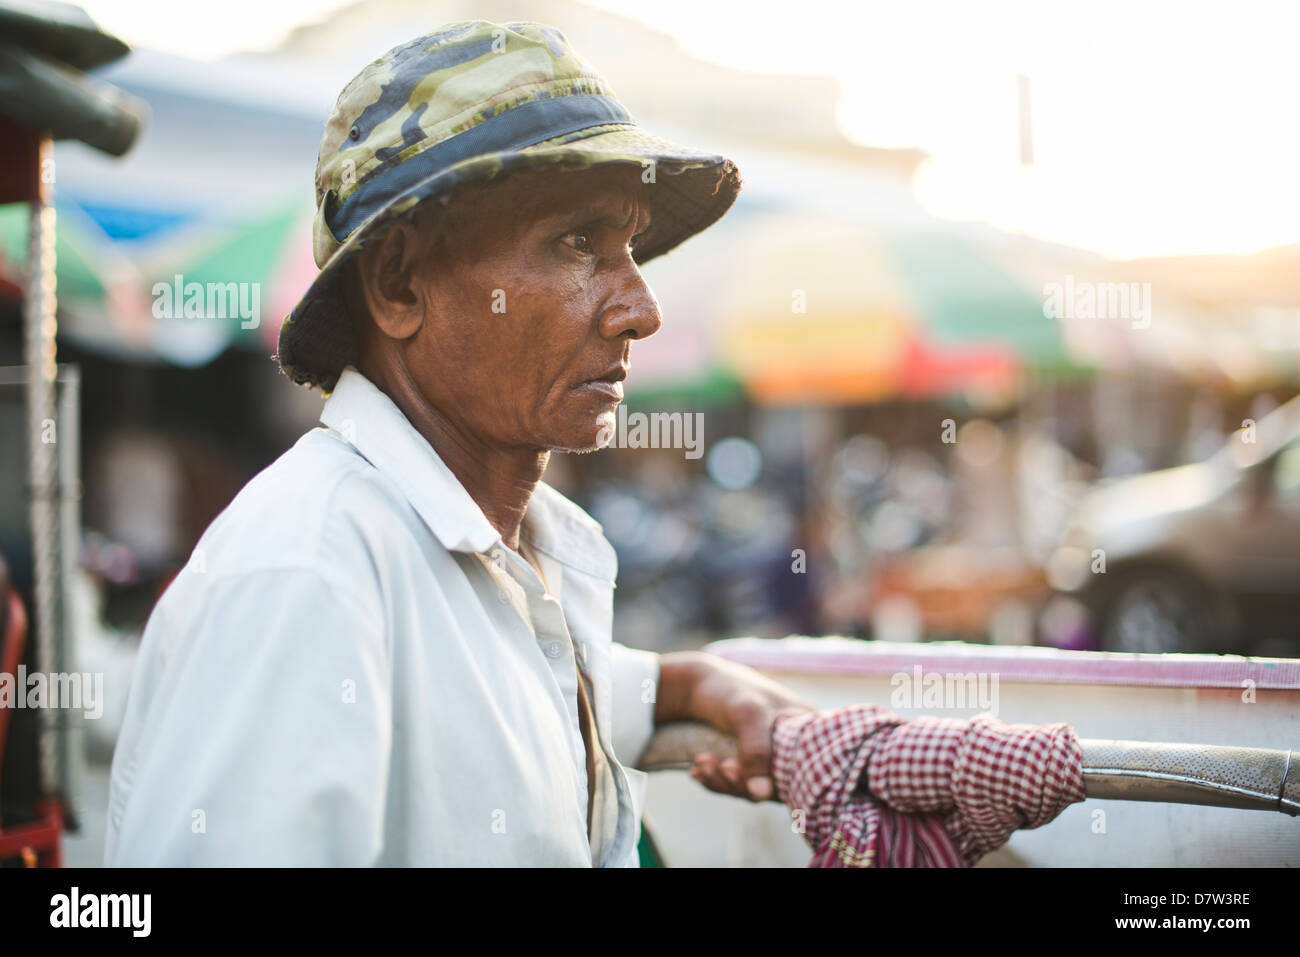 A cyclo driver awaits for customers, transportation in Cambodia Stock Photo